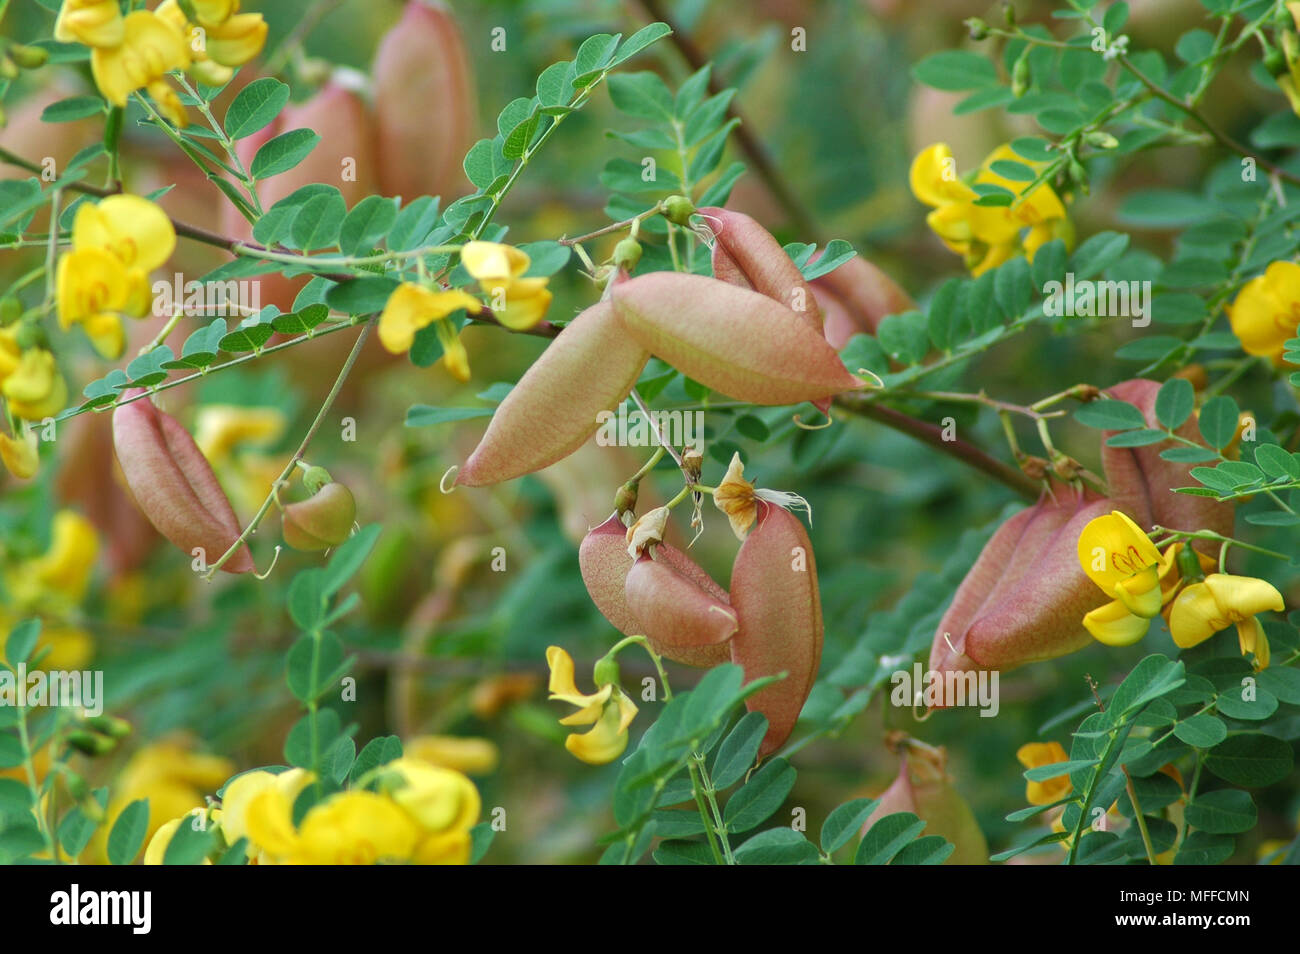 Inflated seed pods of Common bladder senna (Colutea arborescens.) Stock Photo